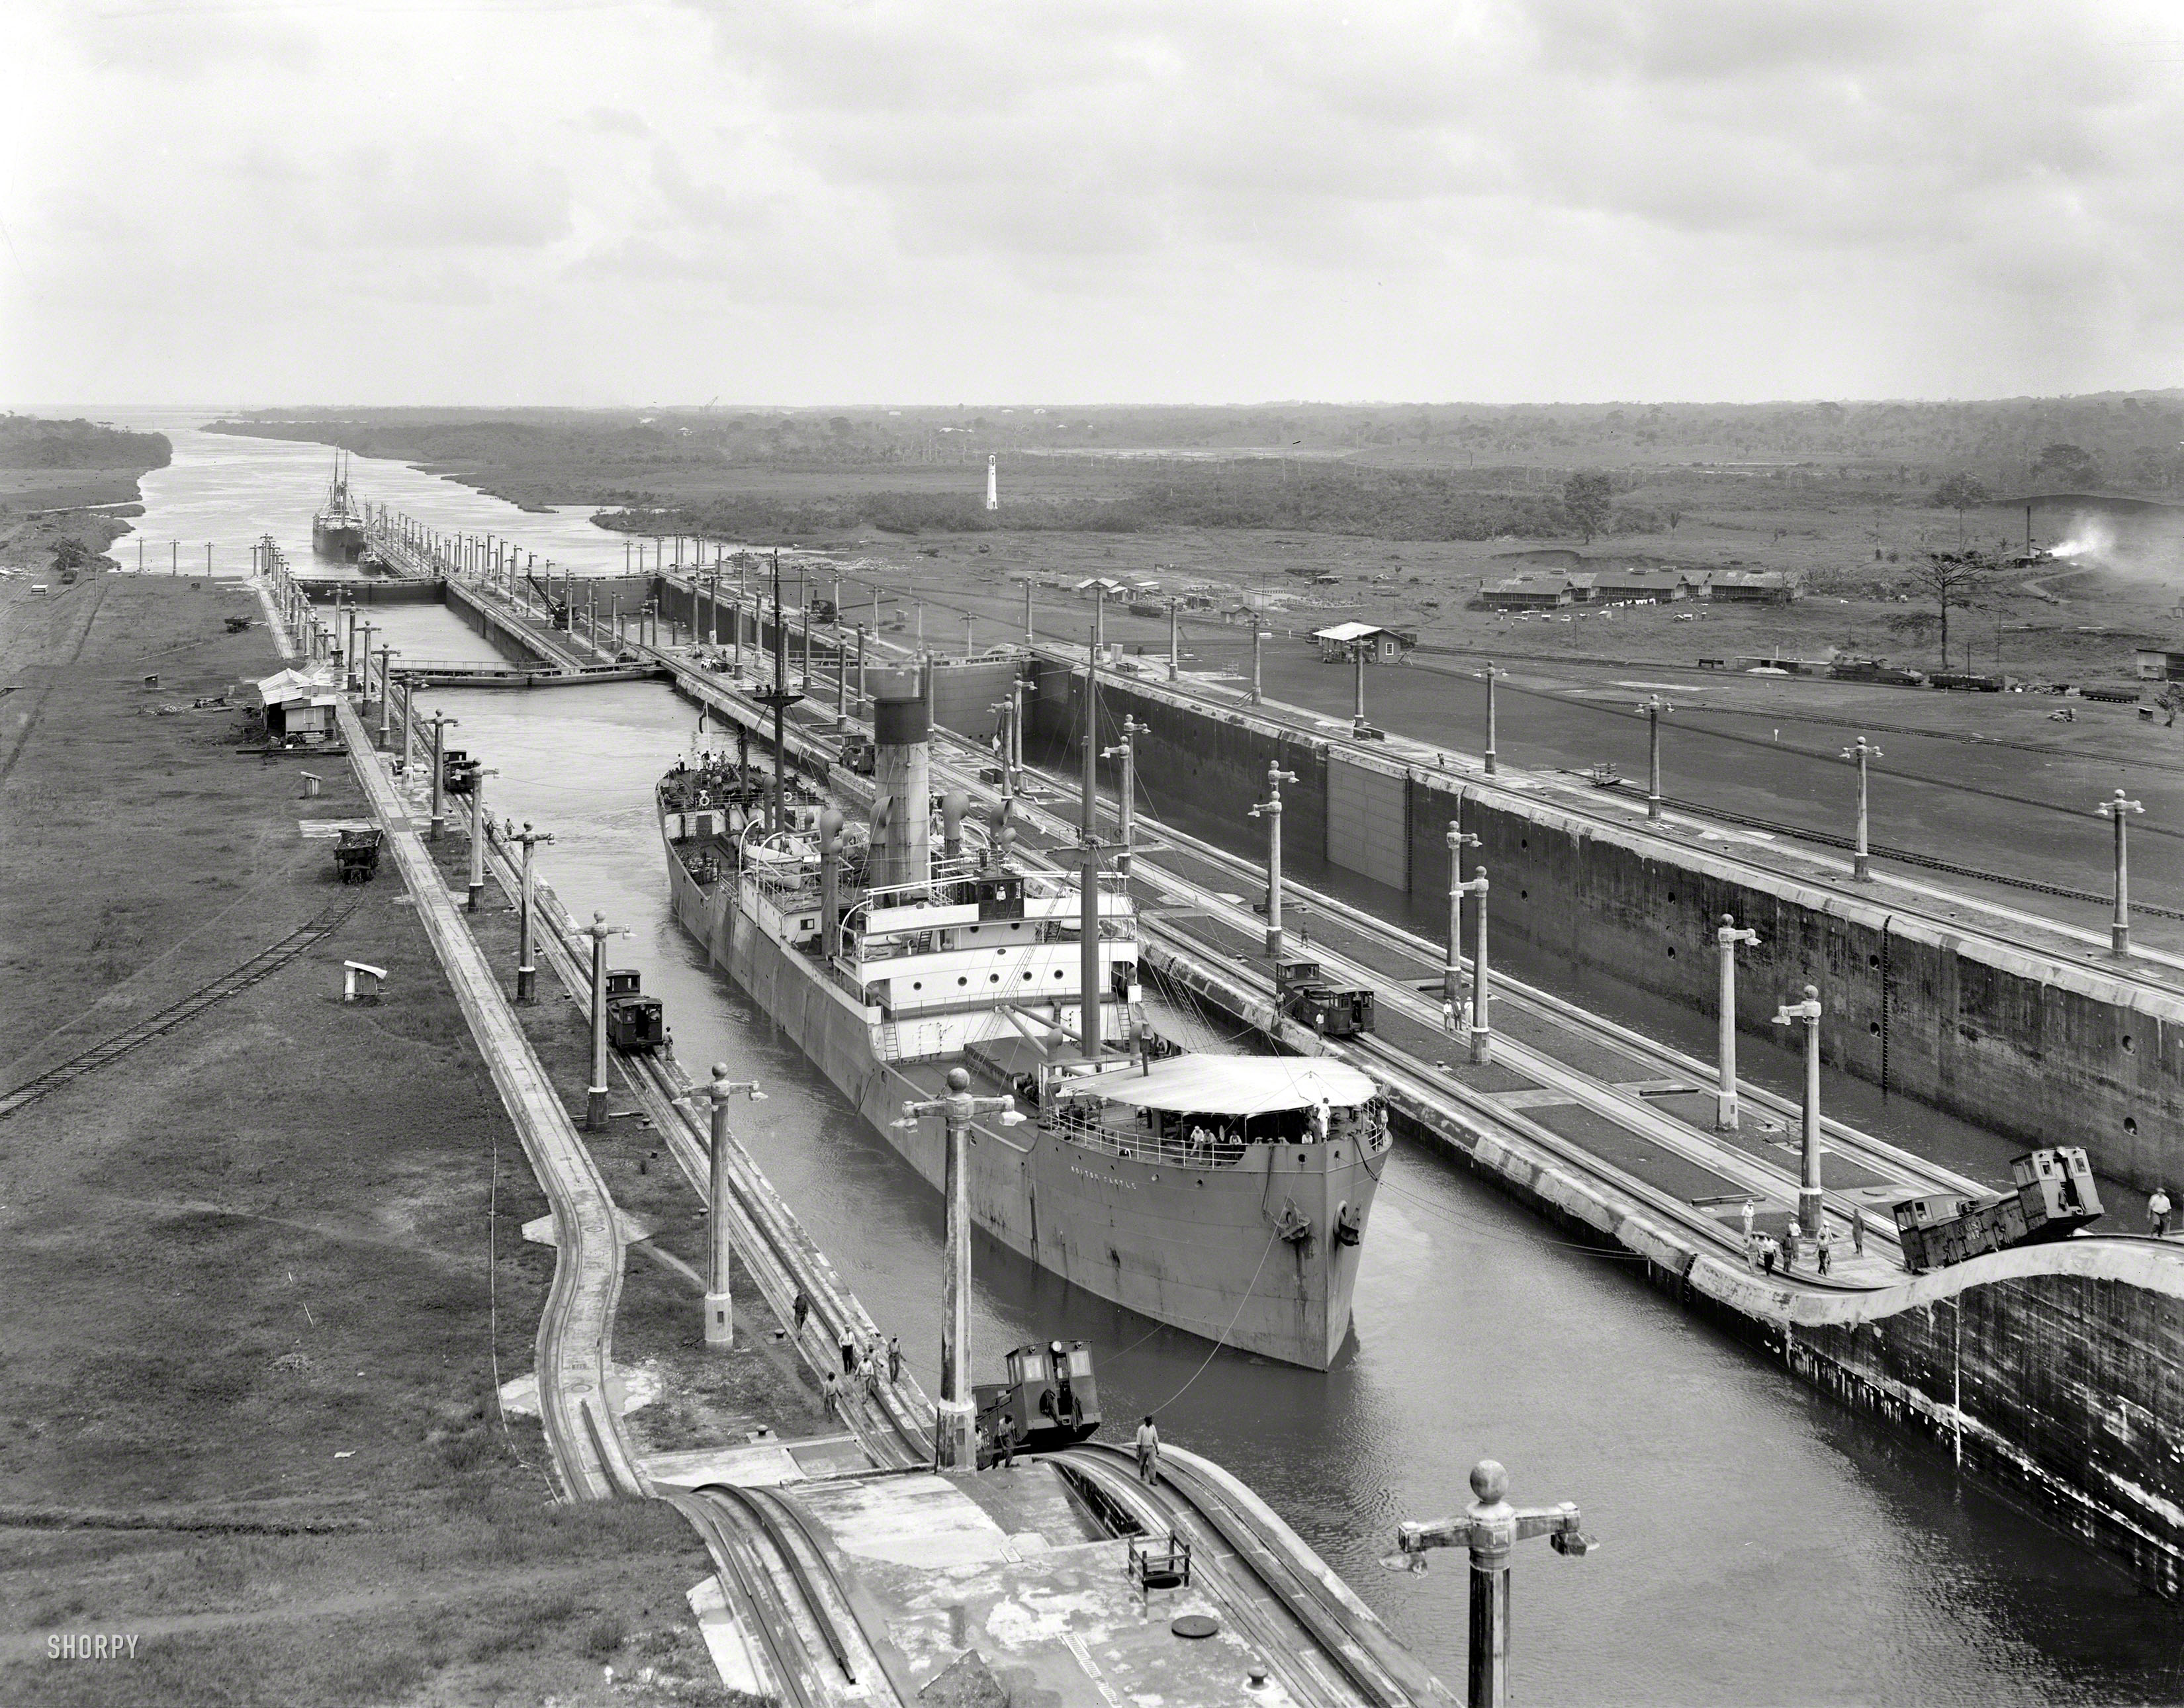 Circa 1915. "Bolton Castle in Gatun Locks, west chamber, Panama Canal." Just the thing to float your boat. 8x10 inch dry plate glass negative. View full size.